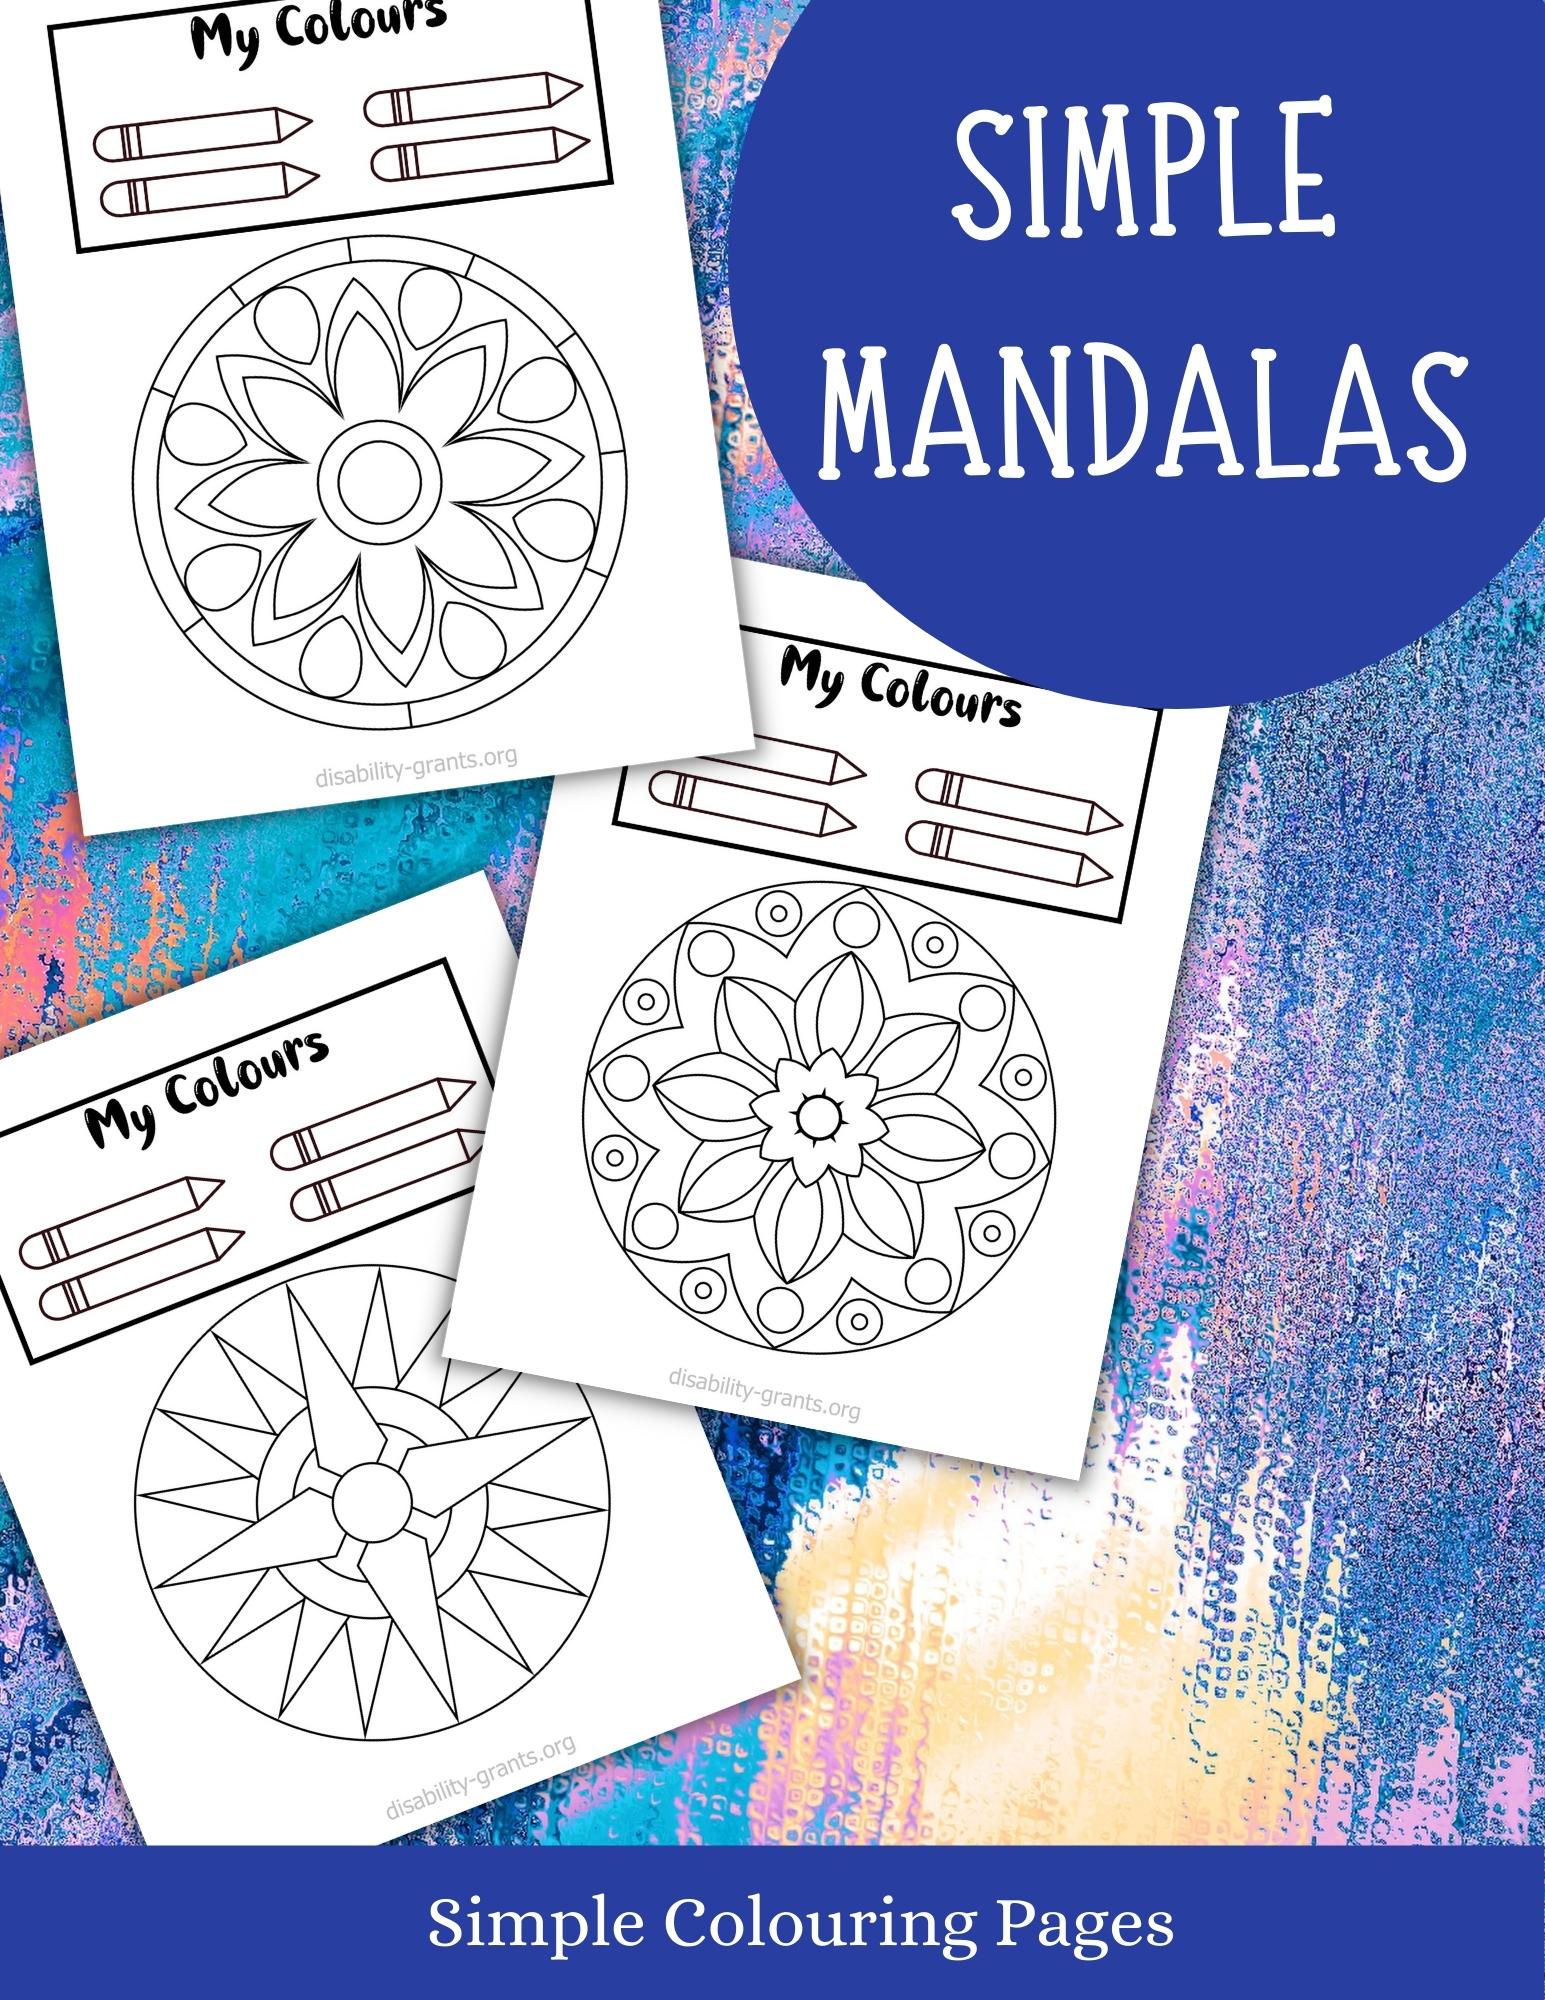 A colouring book for adults with Dementia, Alzheimers and Learning Difficulties featuring simple Mandalas